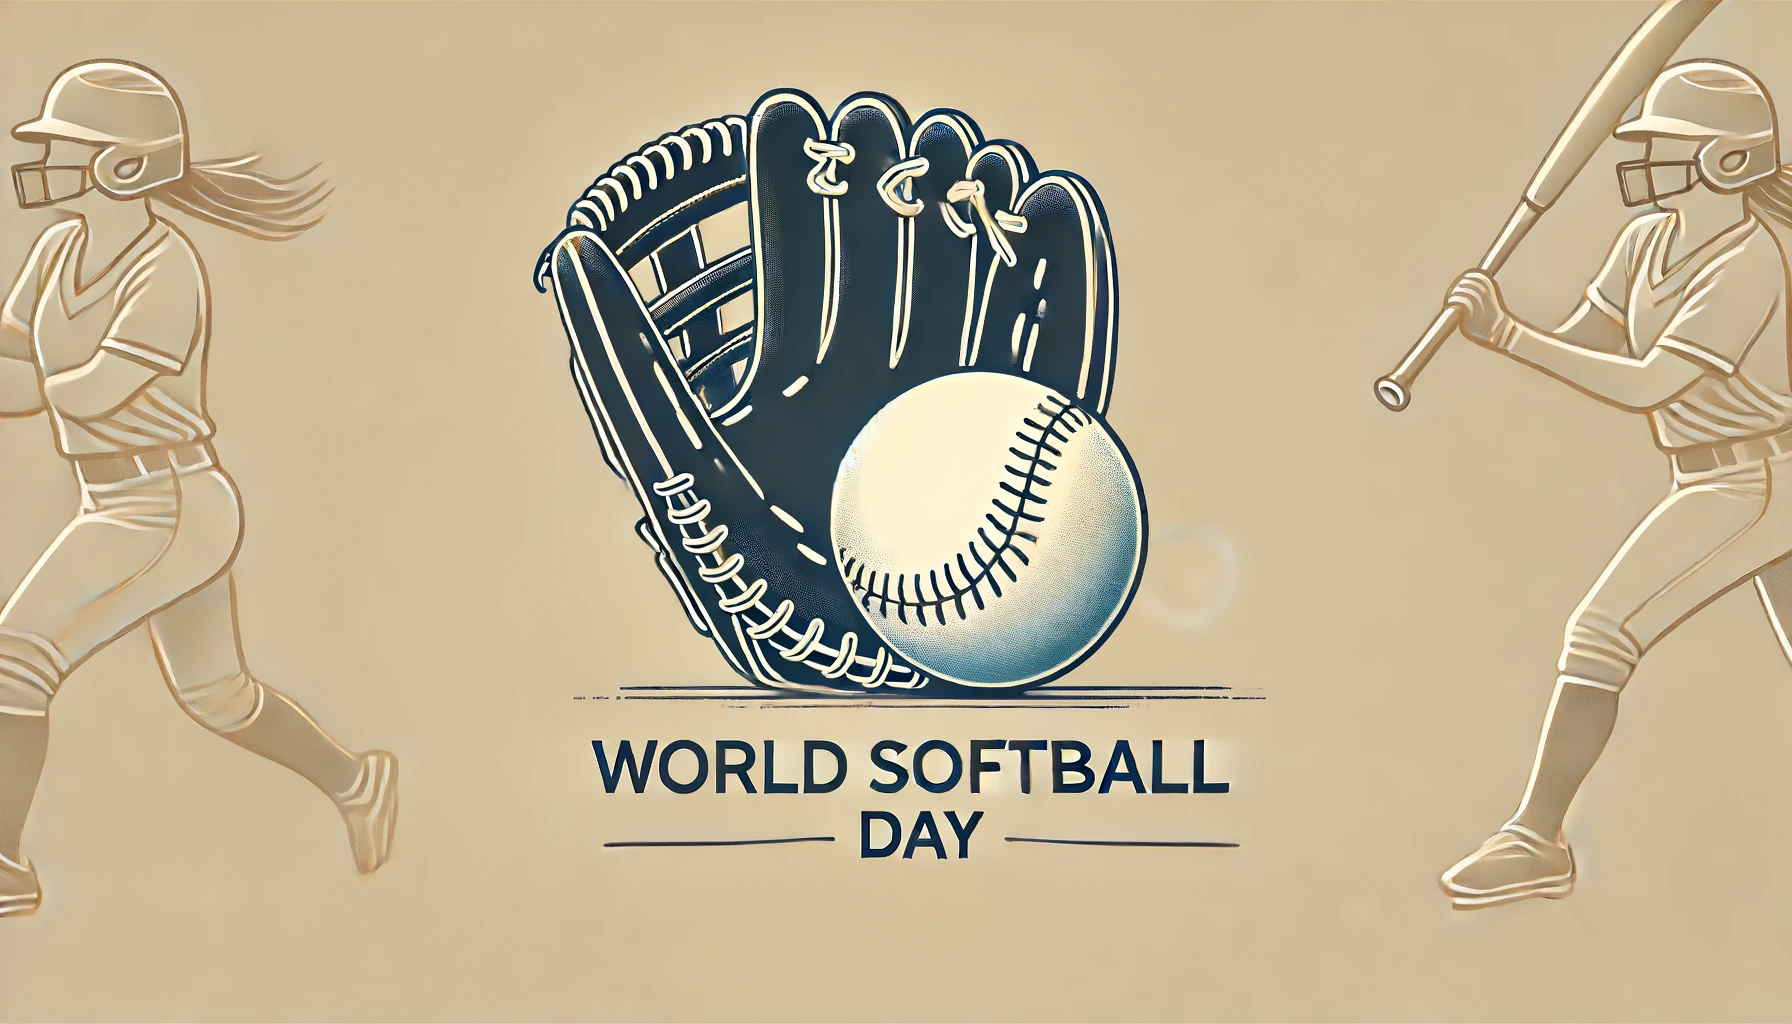 Hit a Home Run with These World Softball Day Wishes